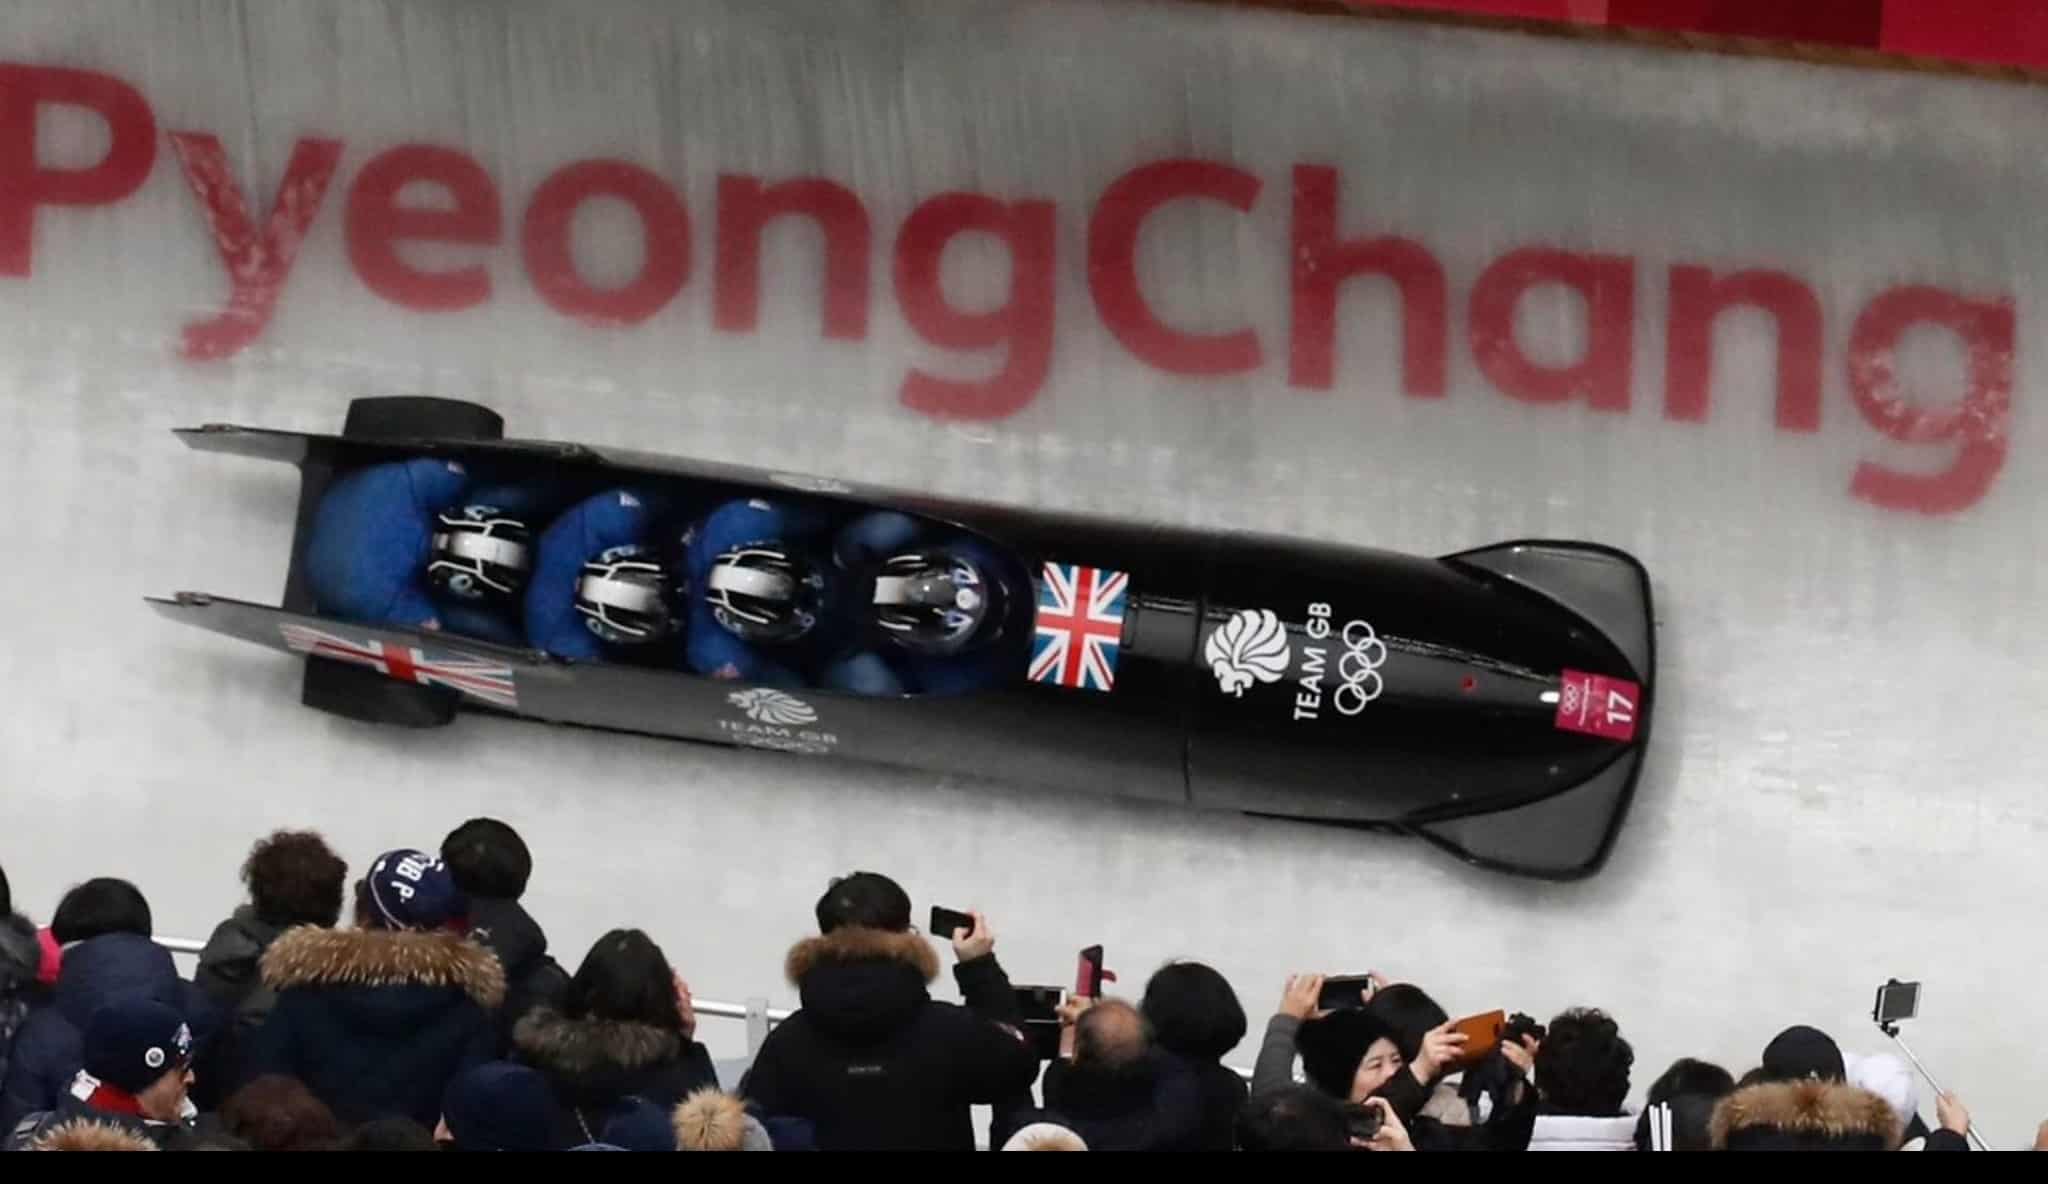 Toby Olubi's four-man bobsleigh team competing at the Olympics